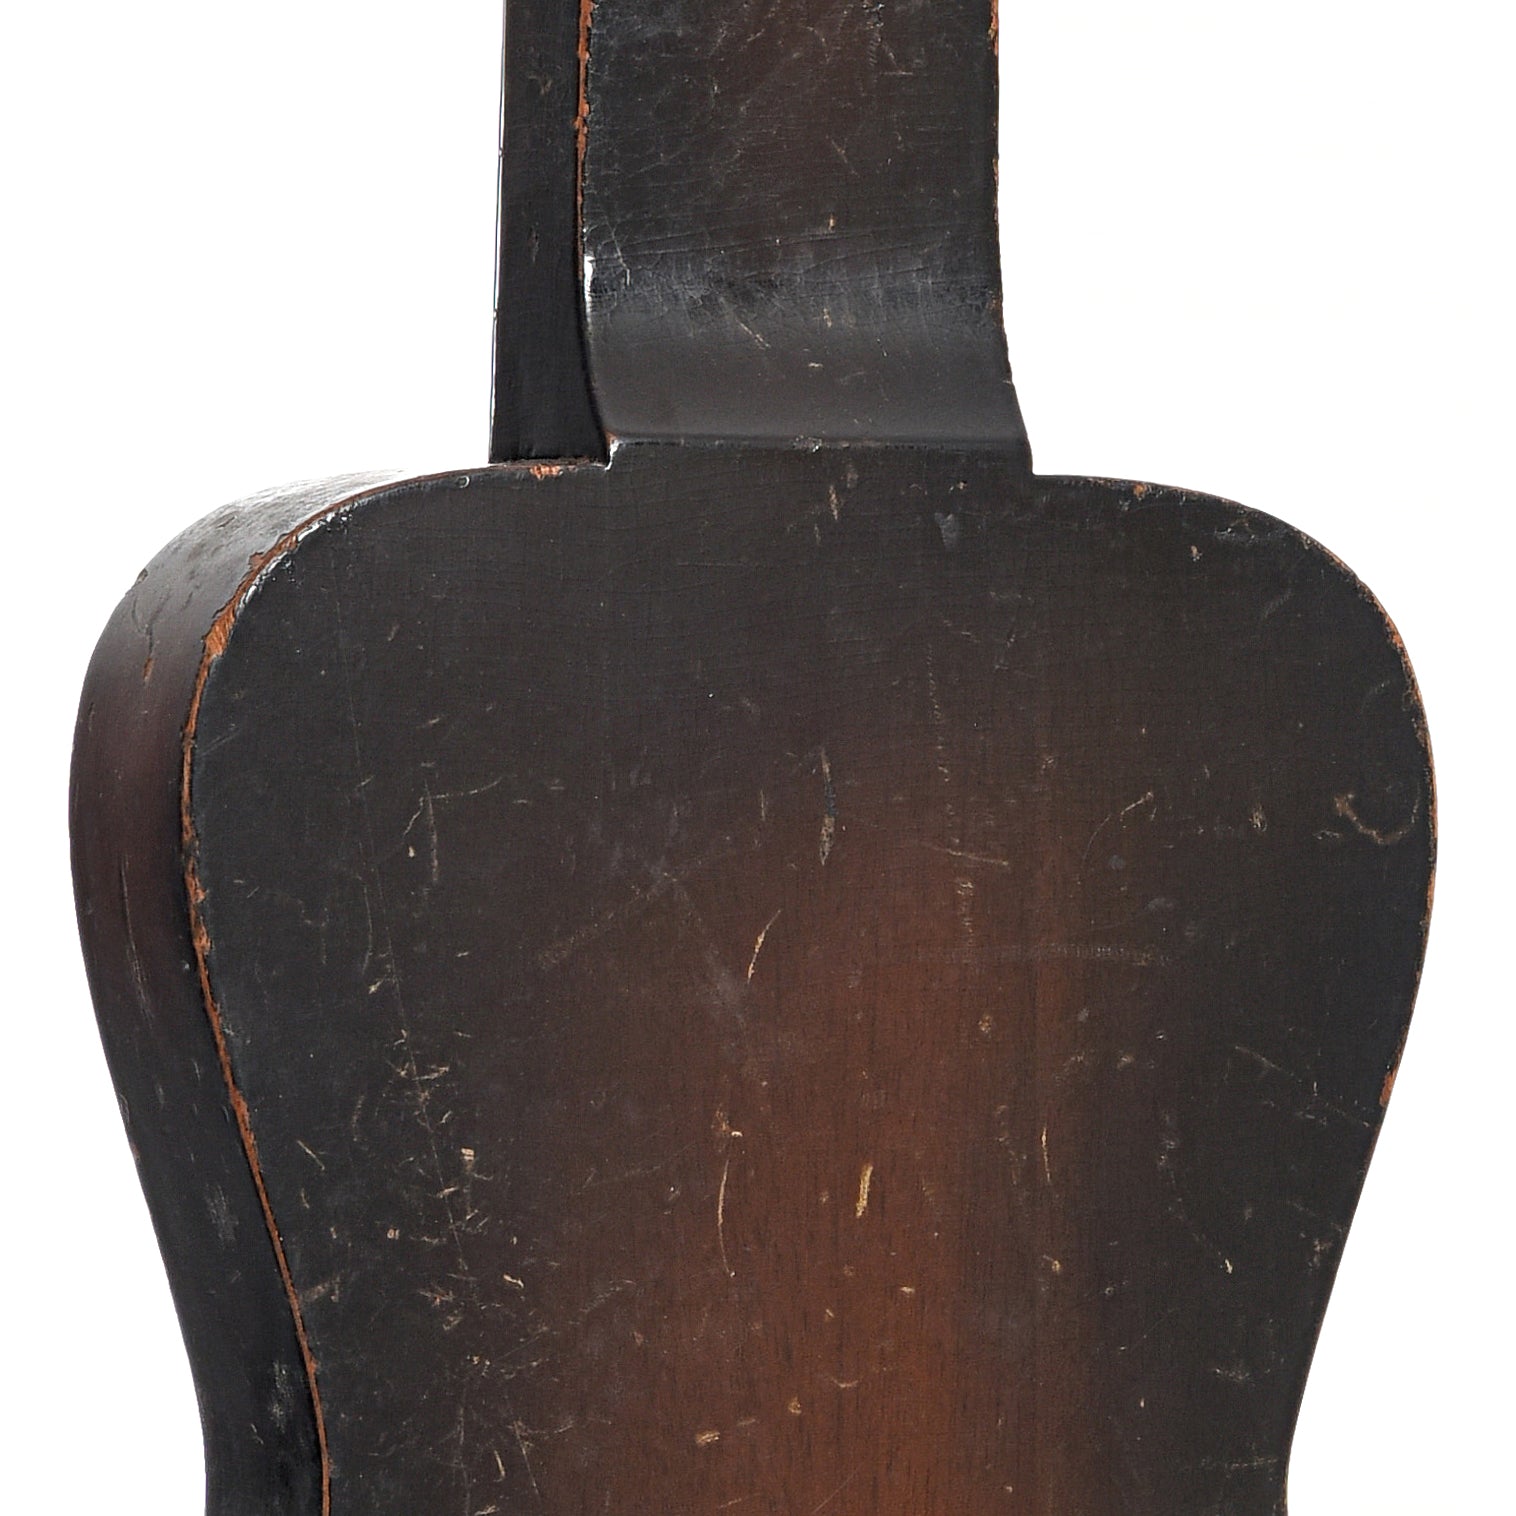 Neck joint of Oahu Diana Deluxe Lap Steel (c.1936-38)